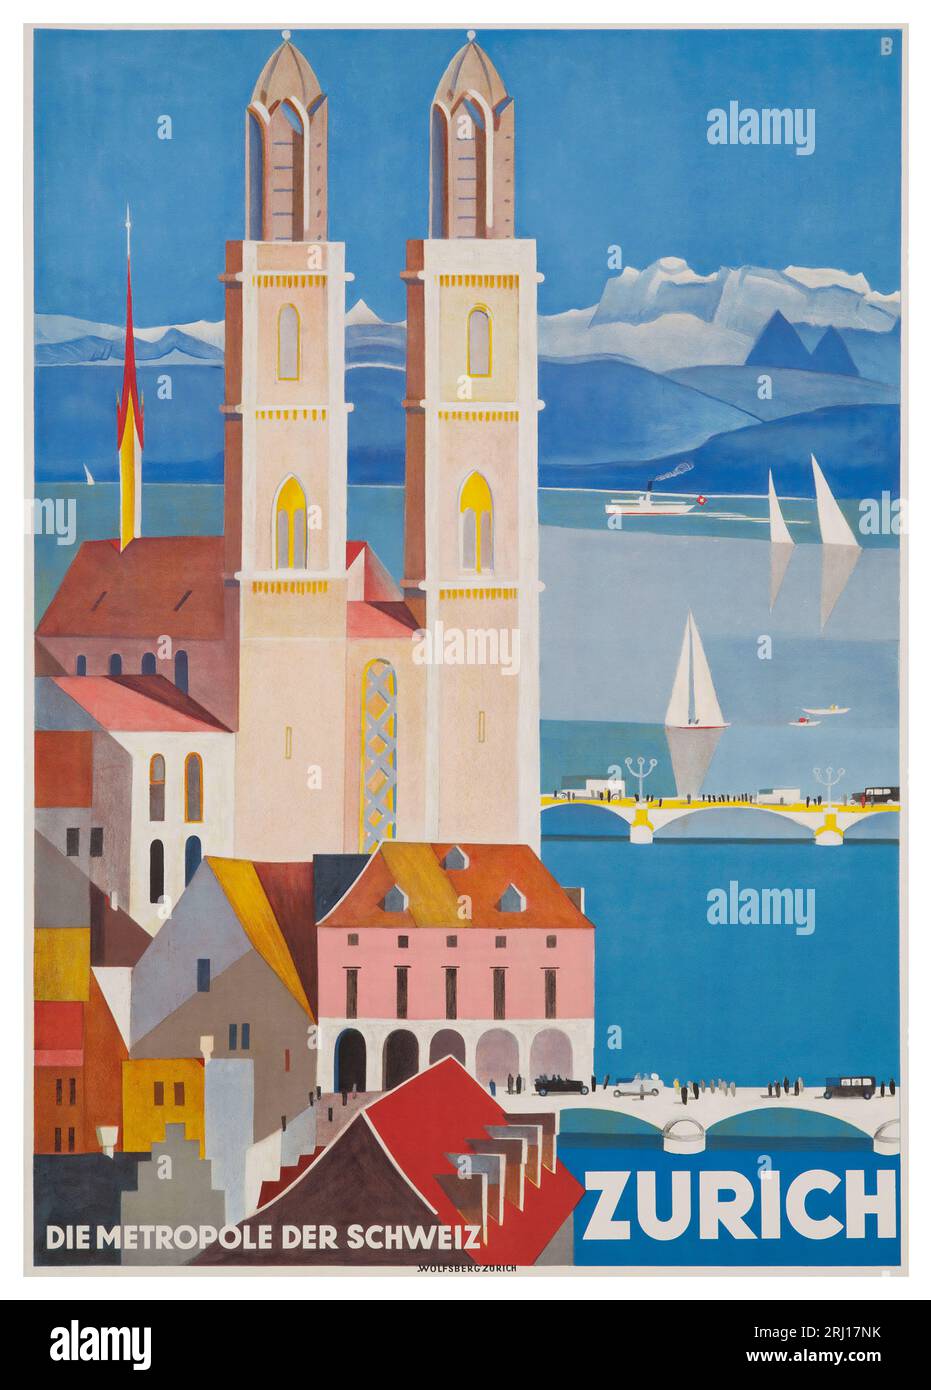 1928 Zurich city poster by BAUMBERGER with view of cathedral, town and lake beyond. Stock Photo